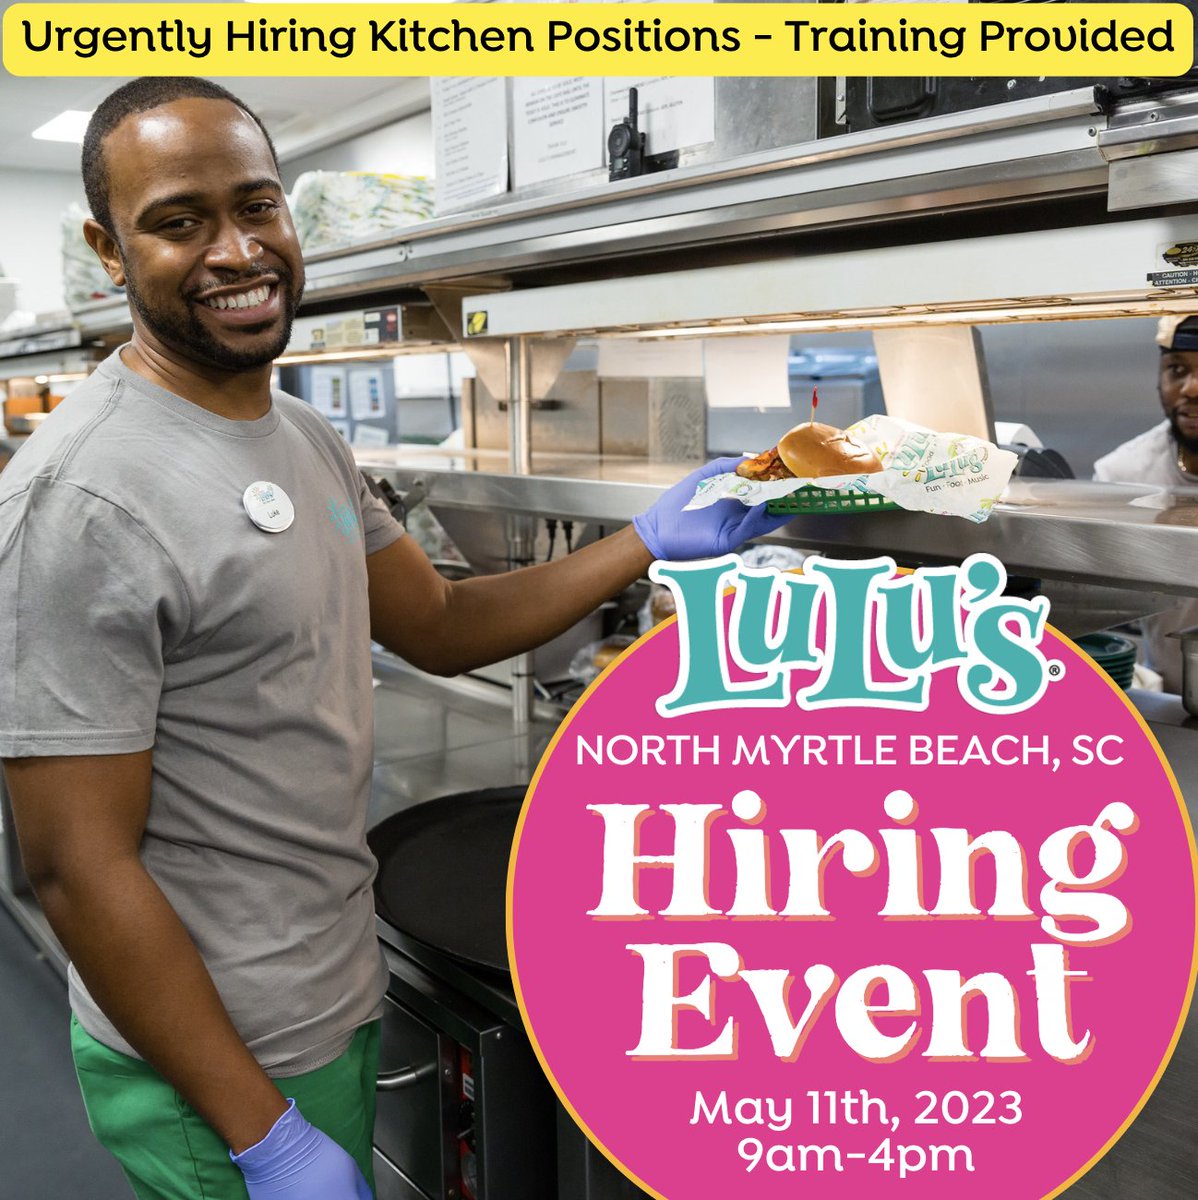 Looking for a fun summer job with great views and great people? 🙋‍♀️🙋‍♀️ Make sure you sign up for our Hiring Event on May 11th! 🌴☀️💚